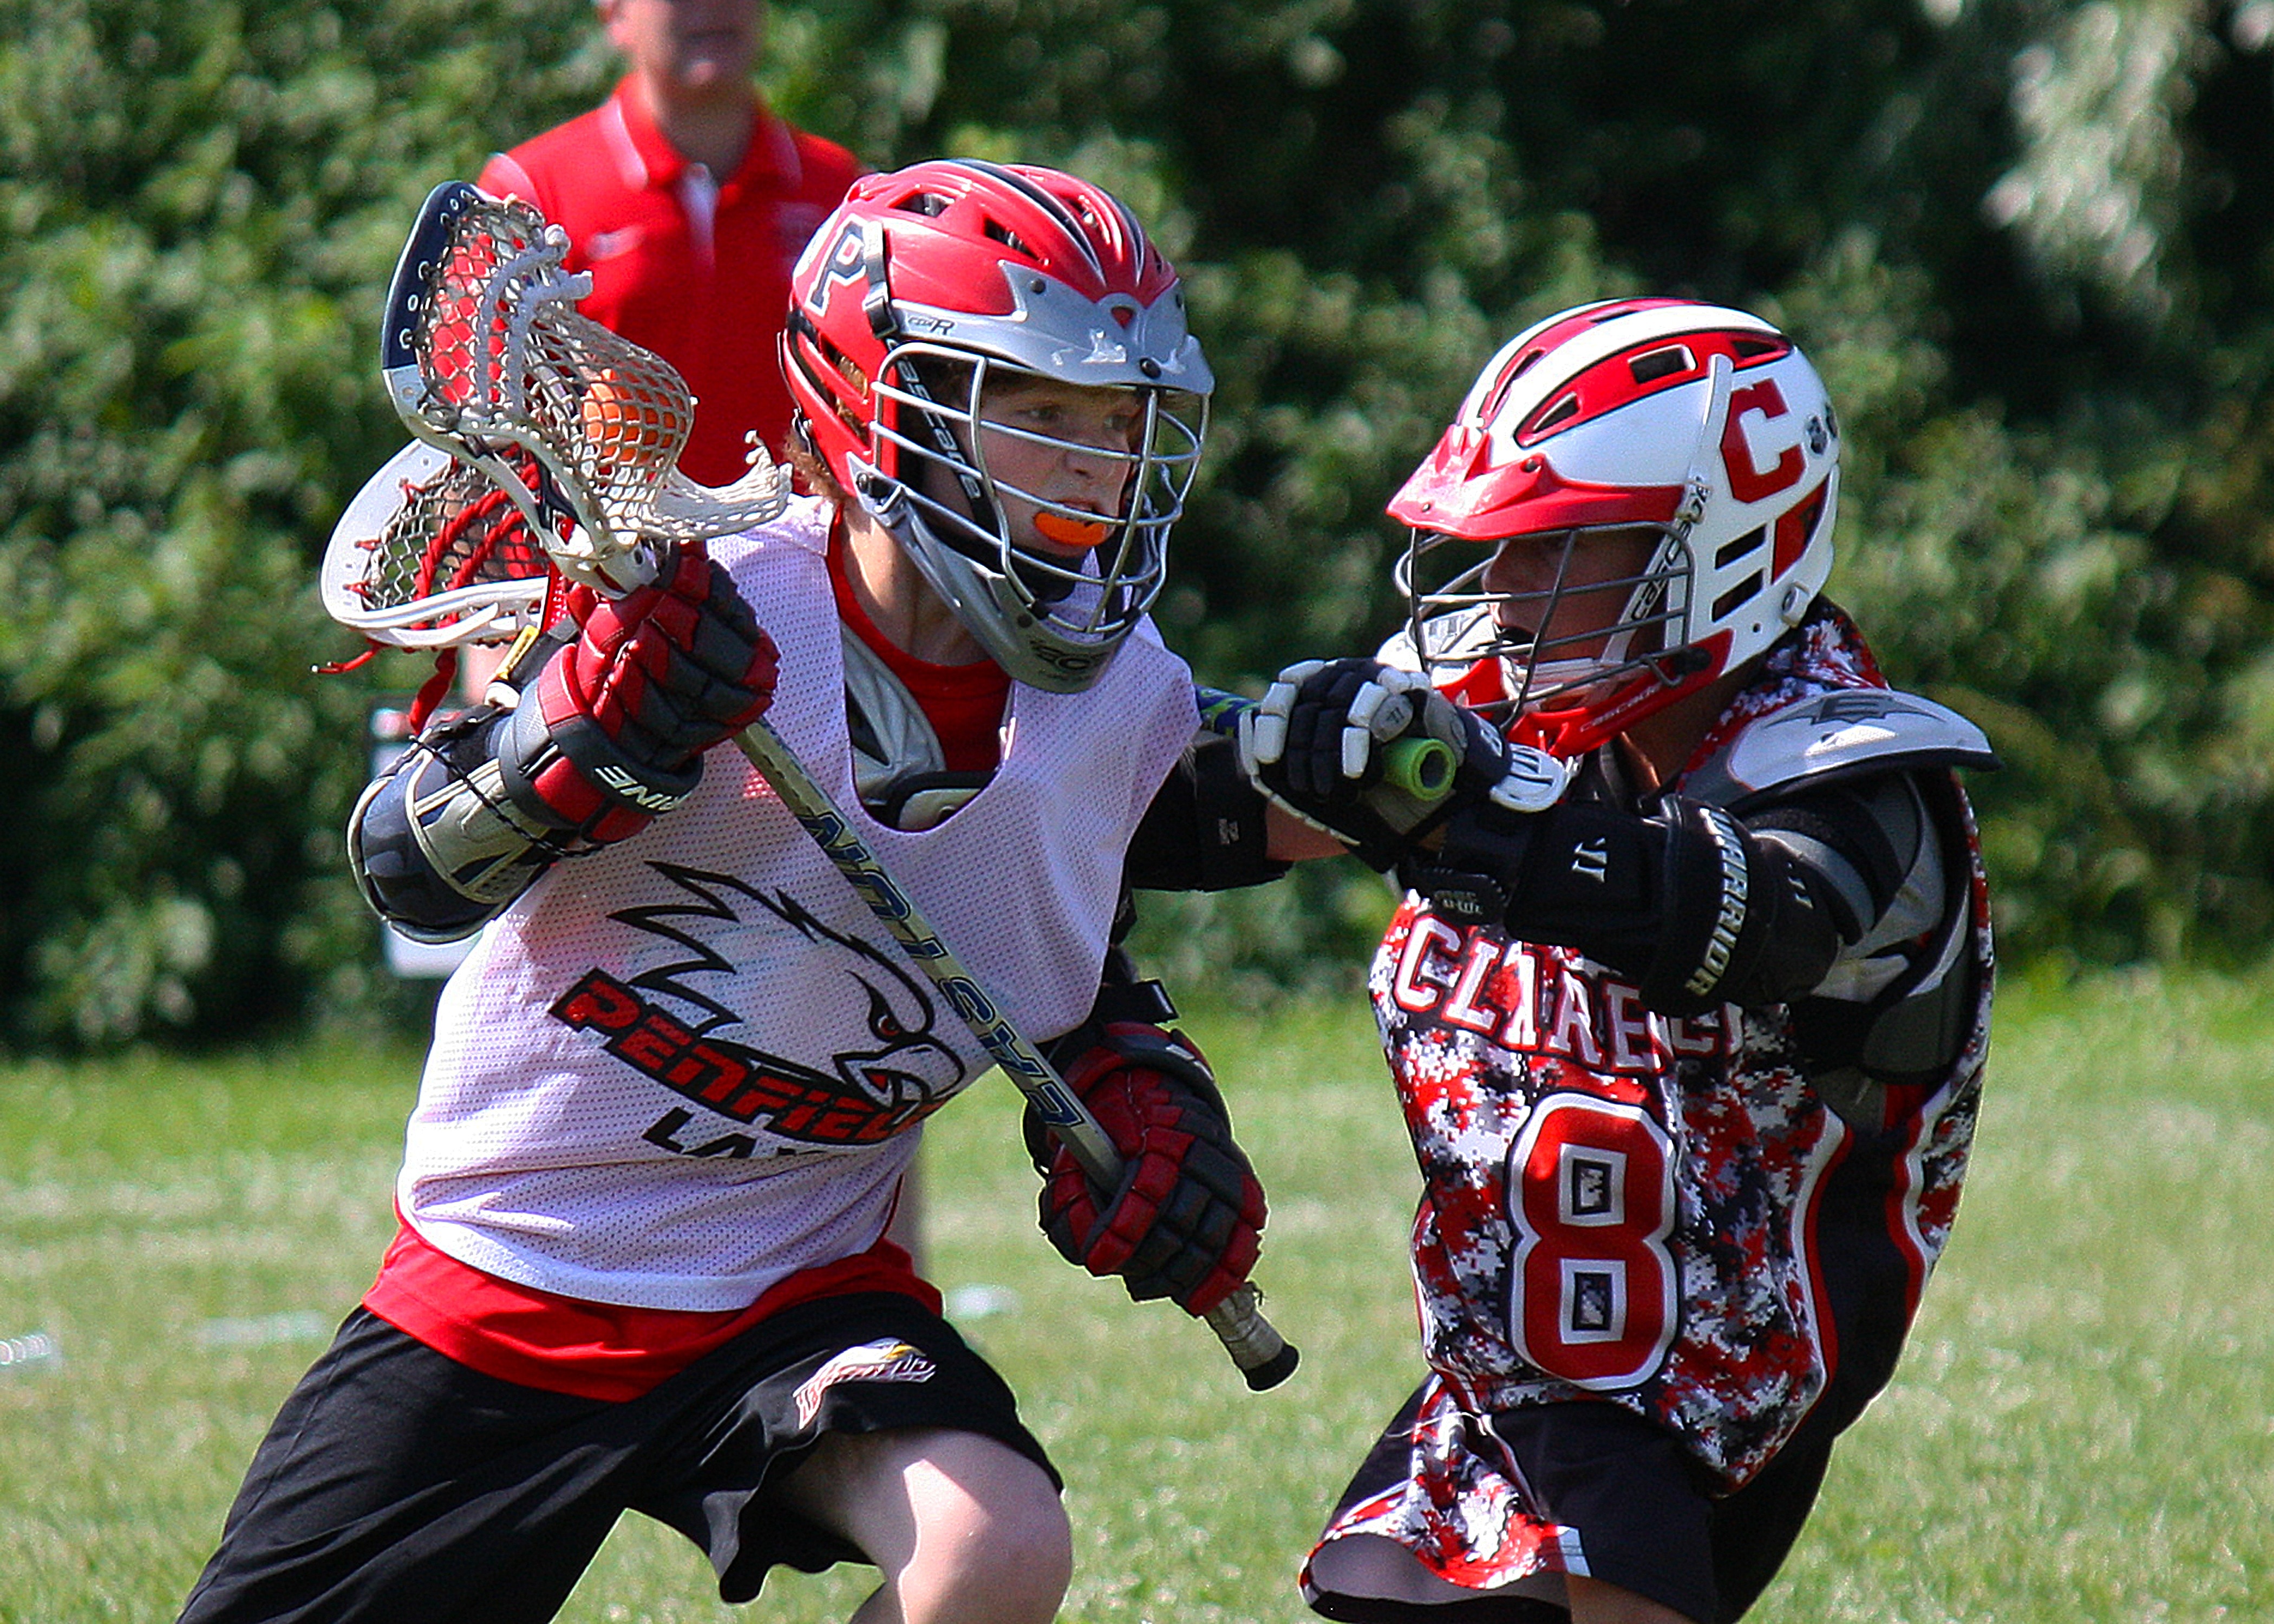 two Lacrosse player playing during daytime